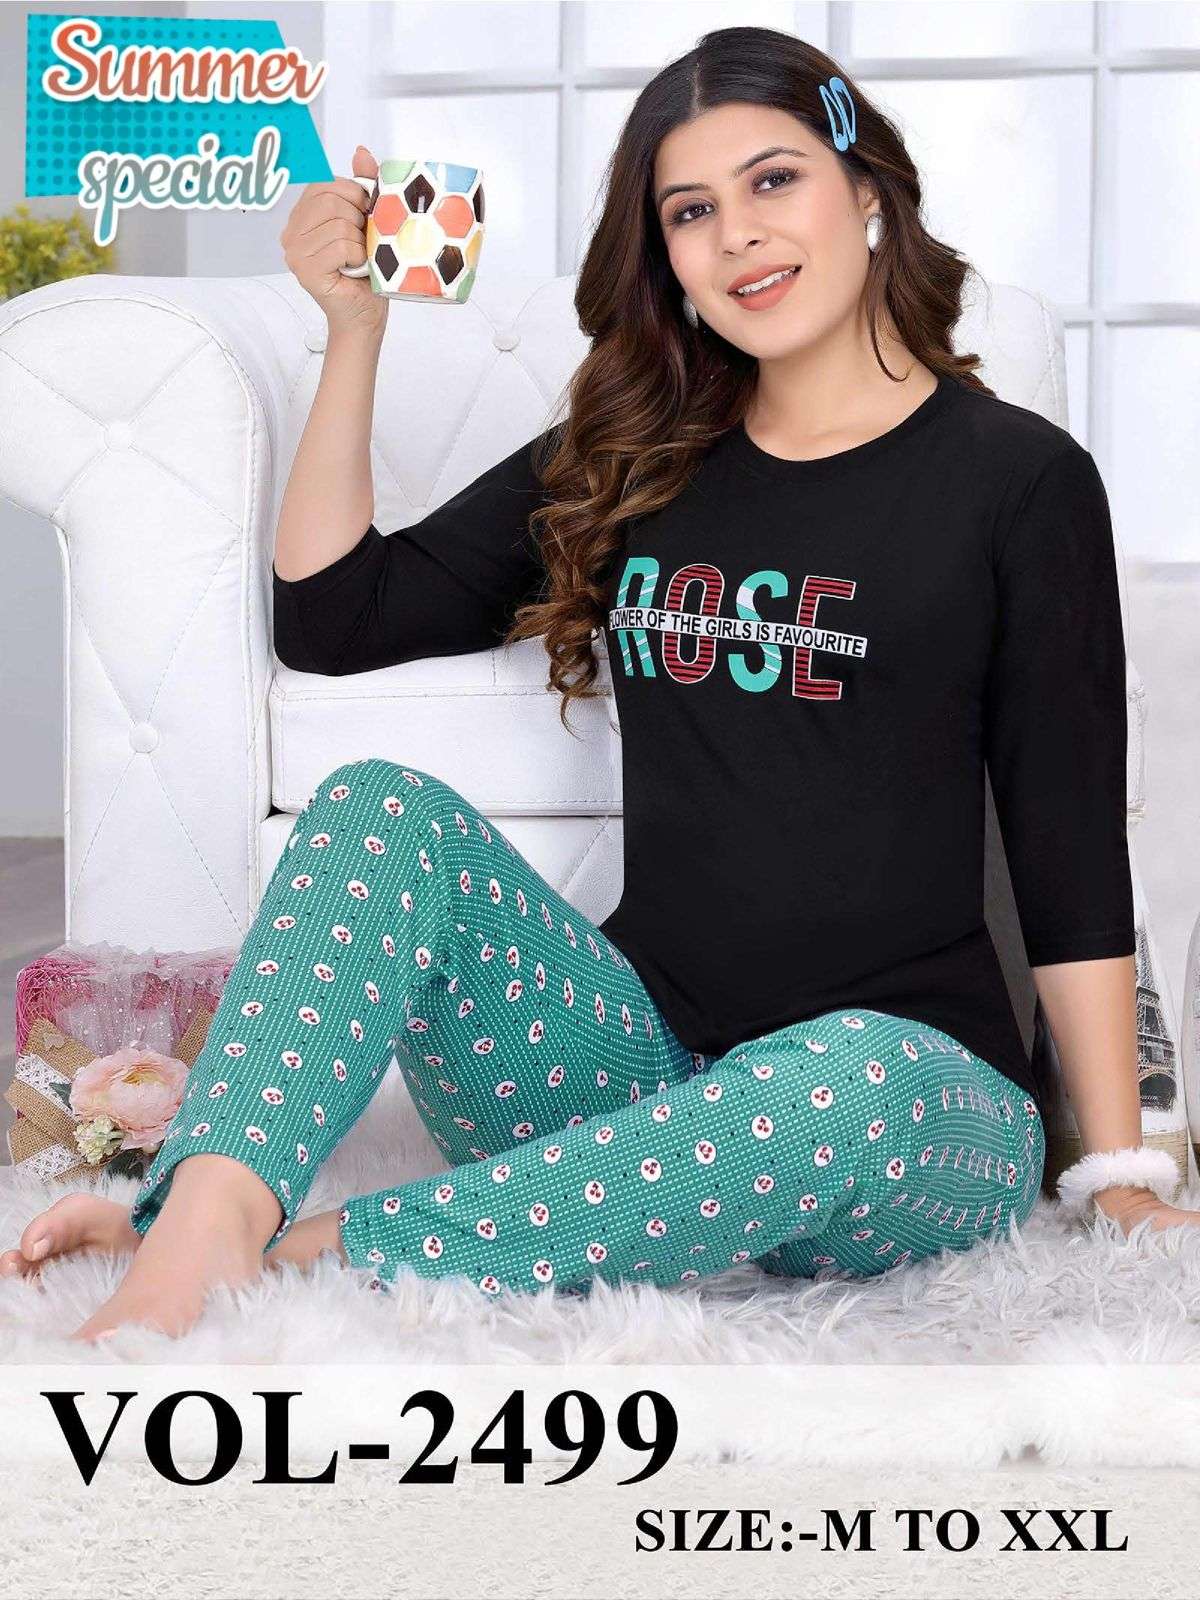 SUMMER SPECIAL VOL.2499 Heavy Shinker Hosiery Cotton Night Suits Full sleeve CATALOG WHOLESALER BEST RATE